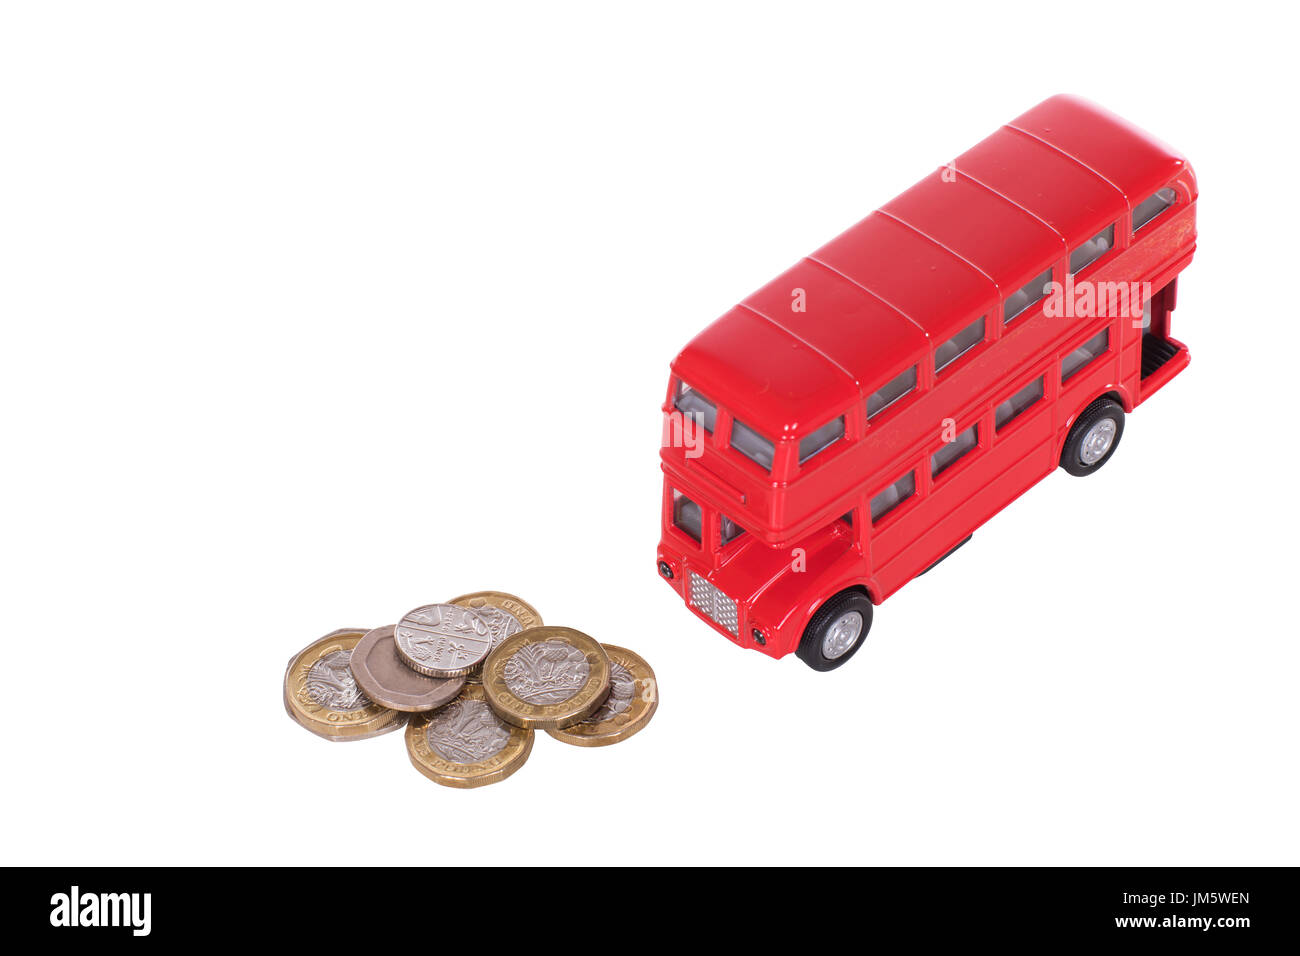 Red double-decker bus with a pile of loose sterling change in a concept of the costs of public transport in Britain isolated on white Stock Photo